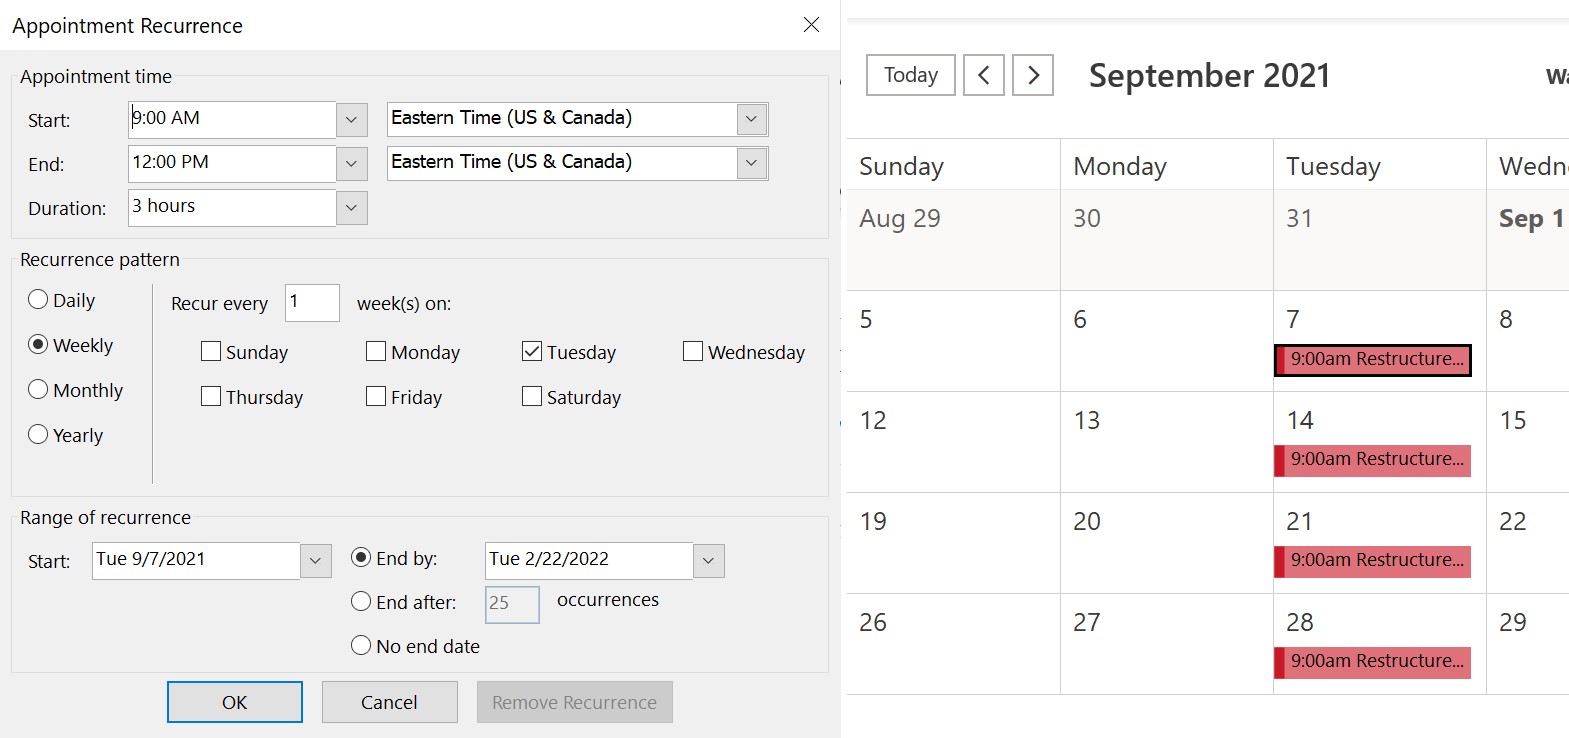 How to colorcode appointments in Outlook Calendar